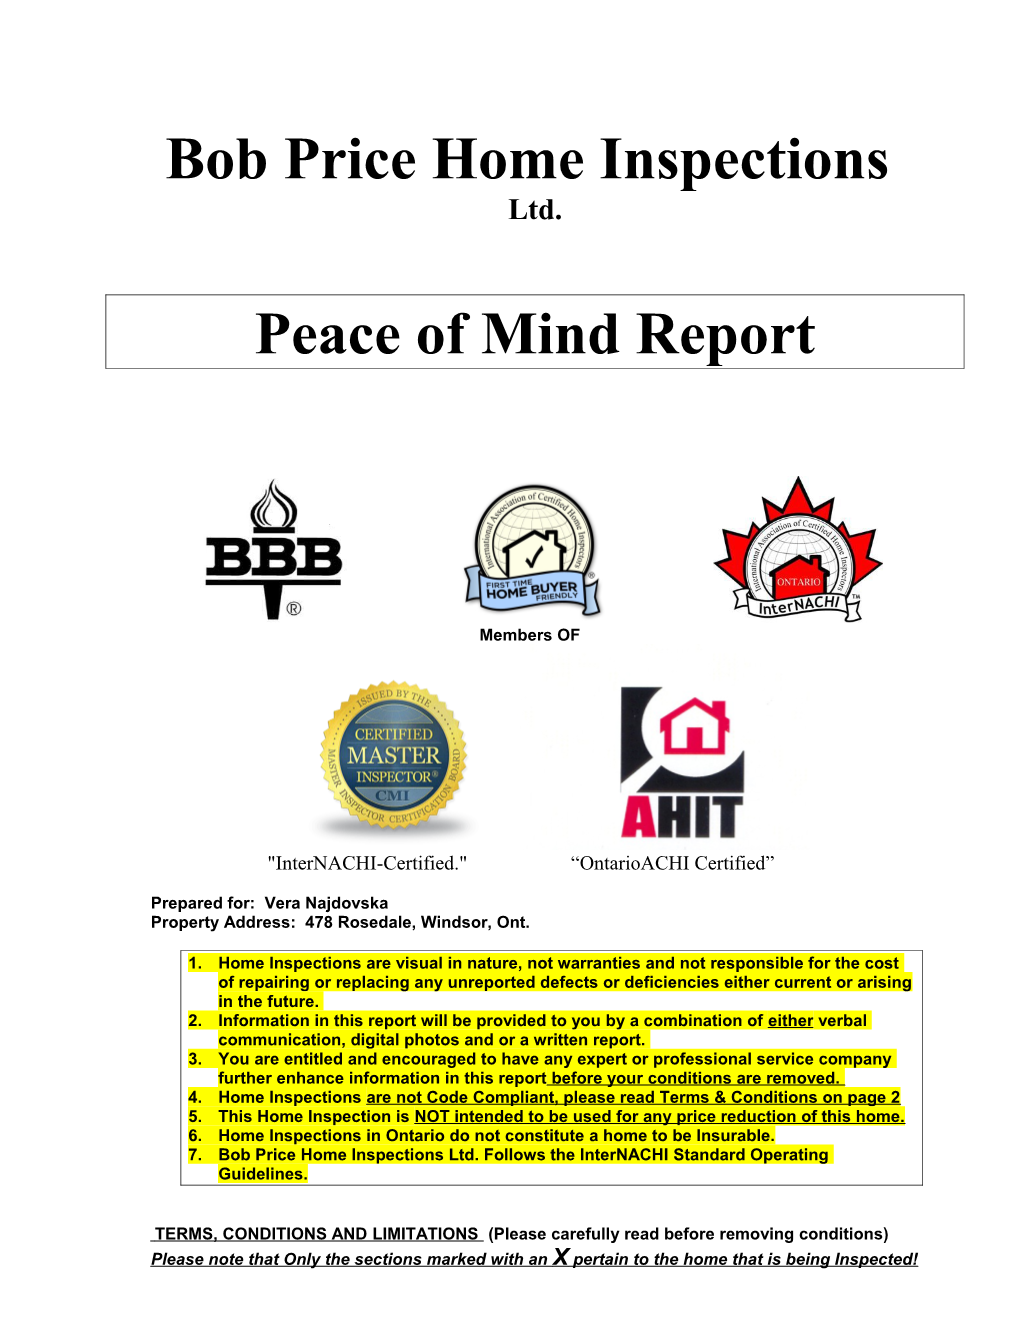 Bob Price Home Inspections